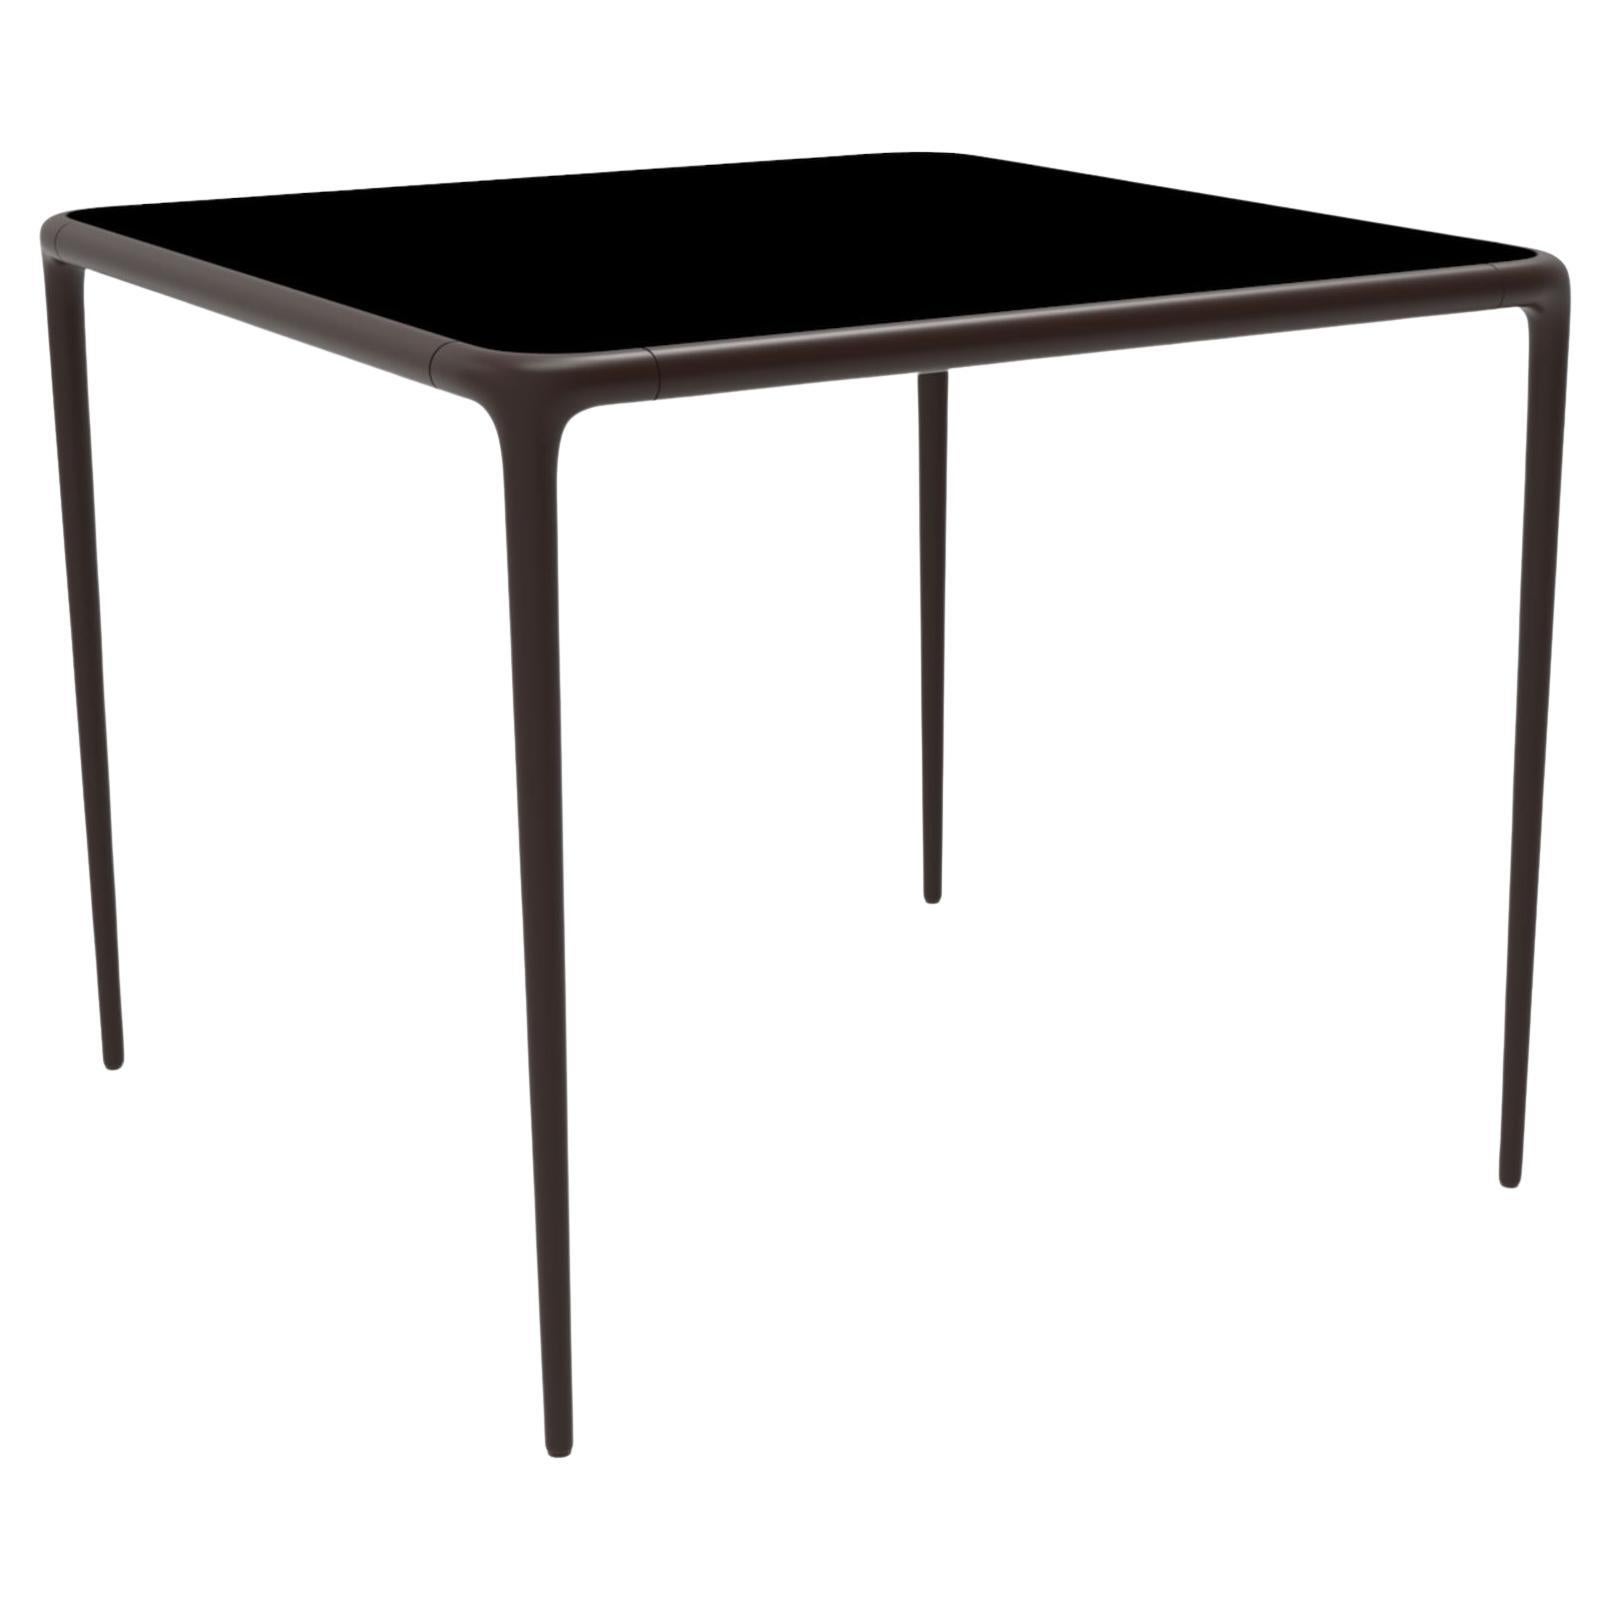 Xaloc Chocolate Glass Top Table 90 by Mowee For Sale